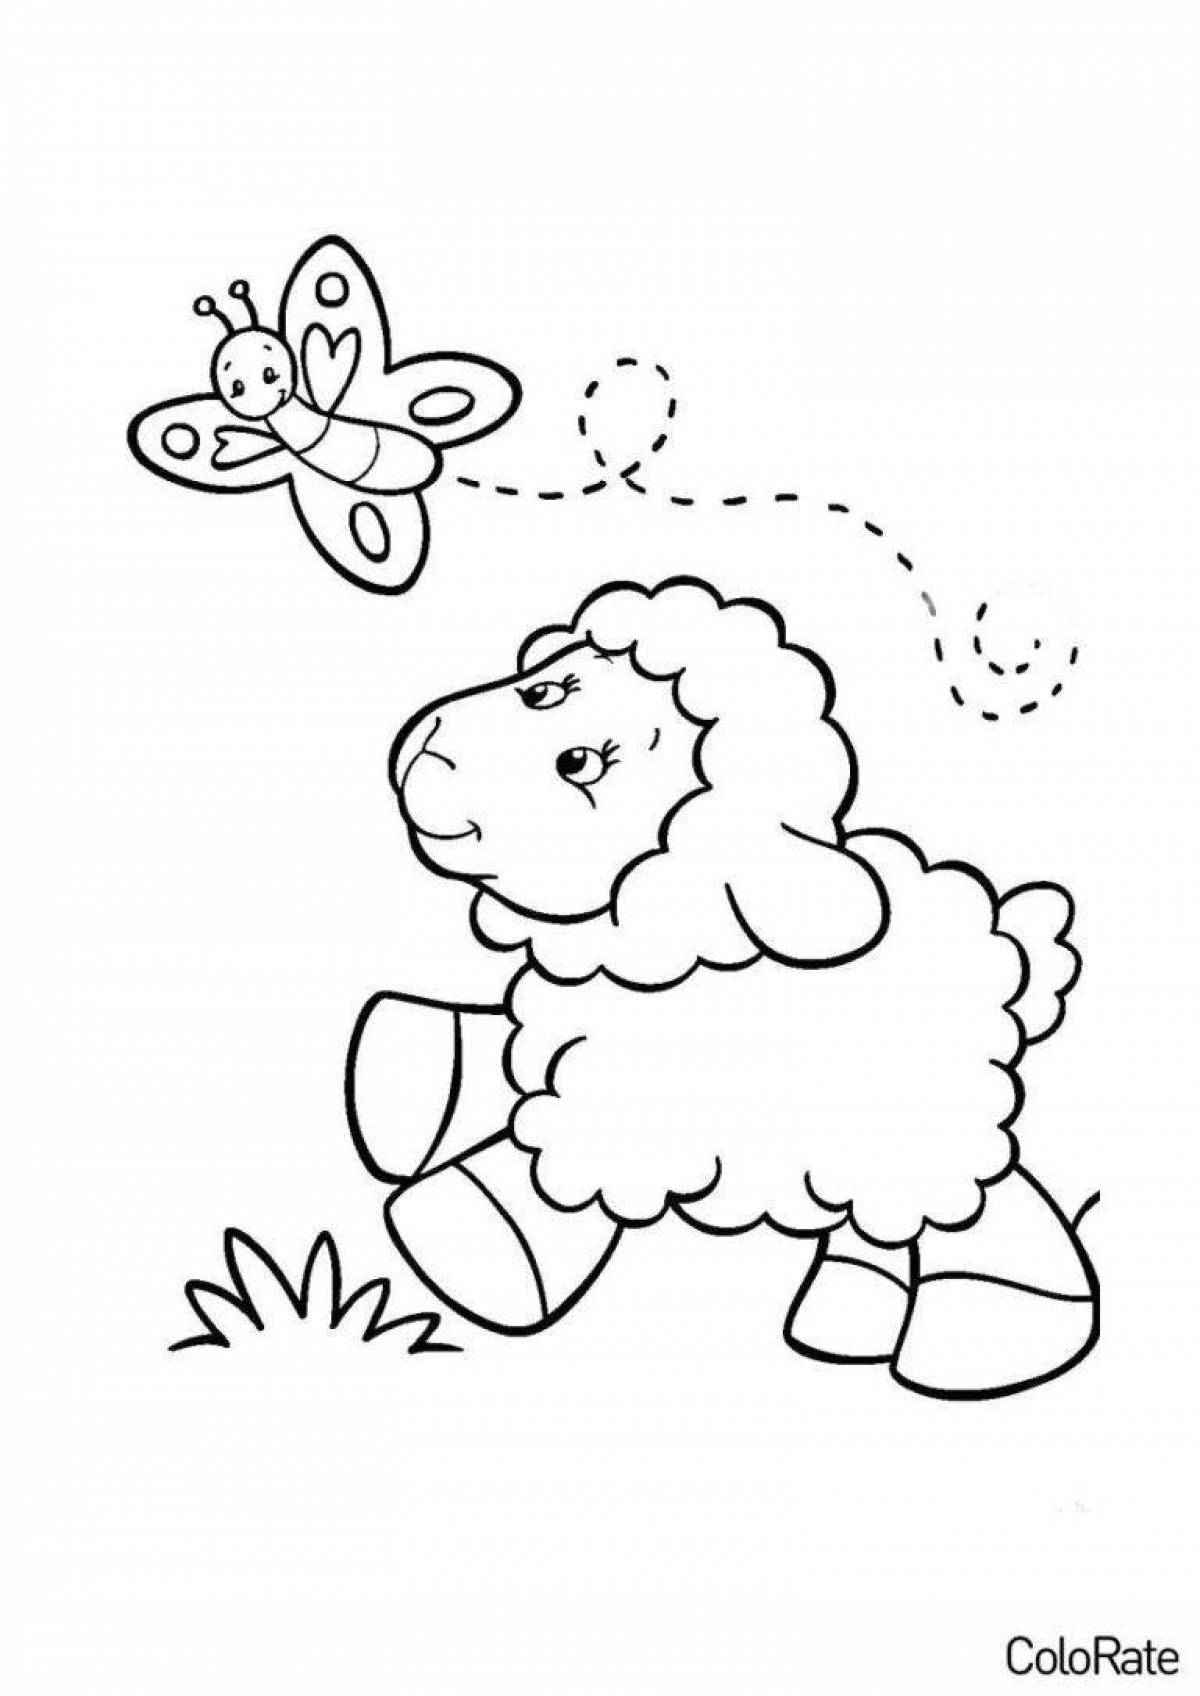 Magic sheep coloring book for 4-5 year olds